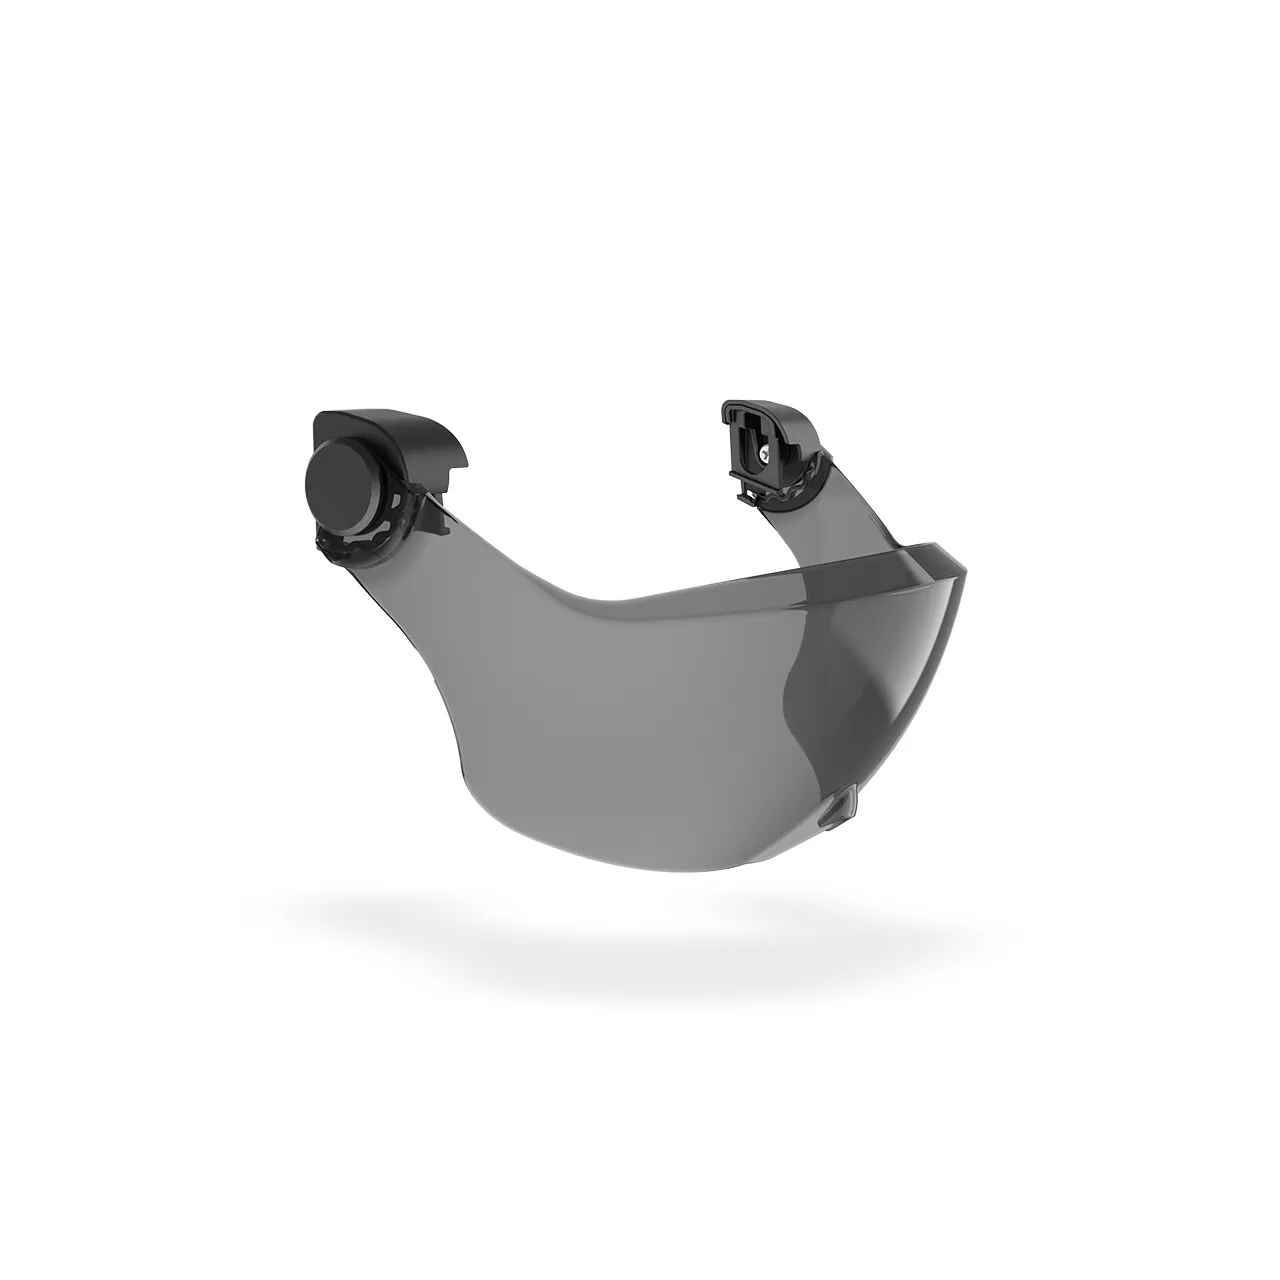 H2 Visor (TINTED), ANSI Z87+ Rated, Anti-fog and Anti-Scratch - Defender Safety